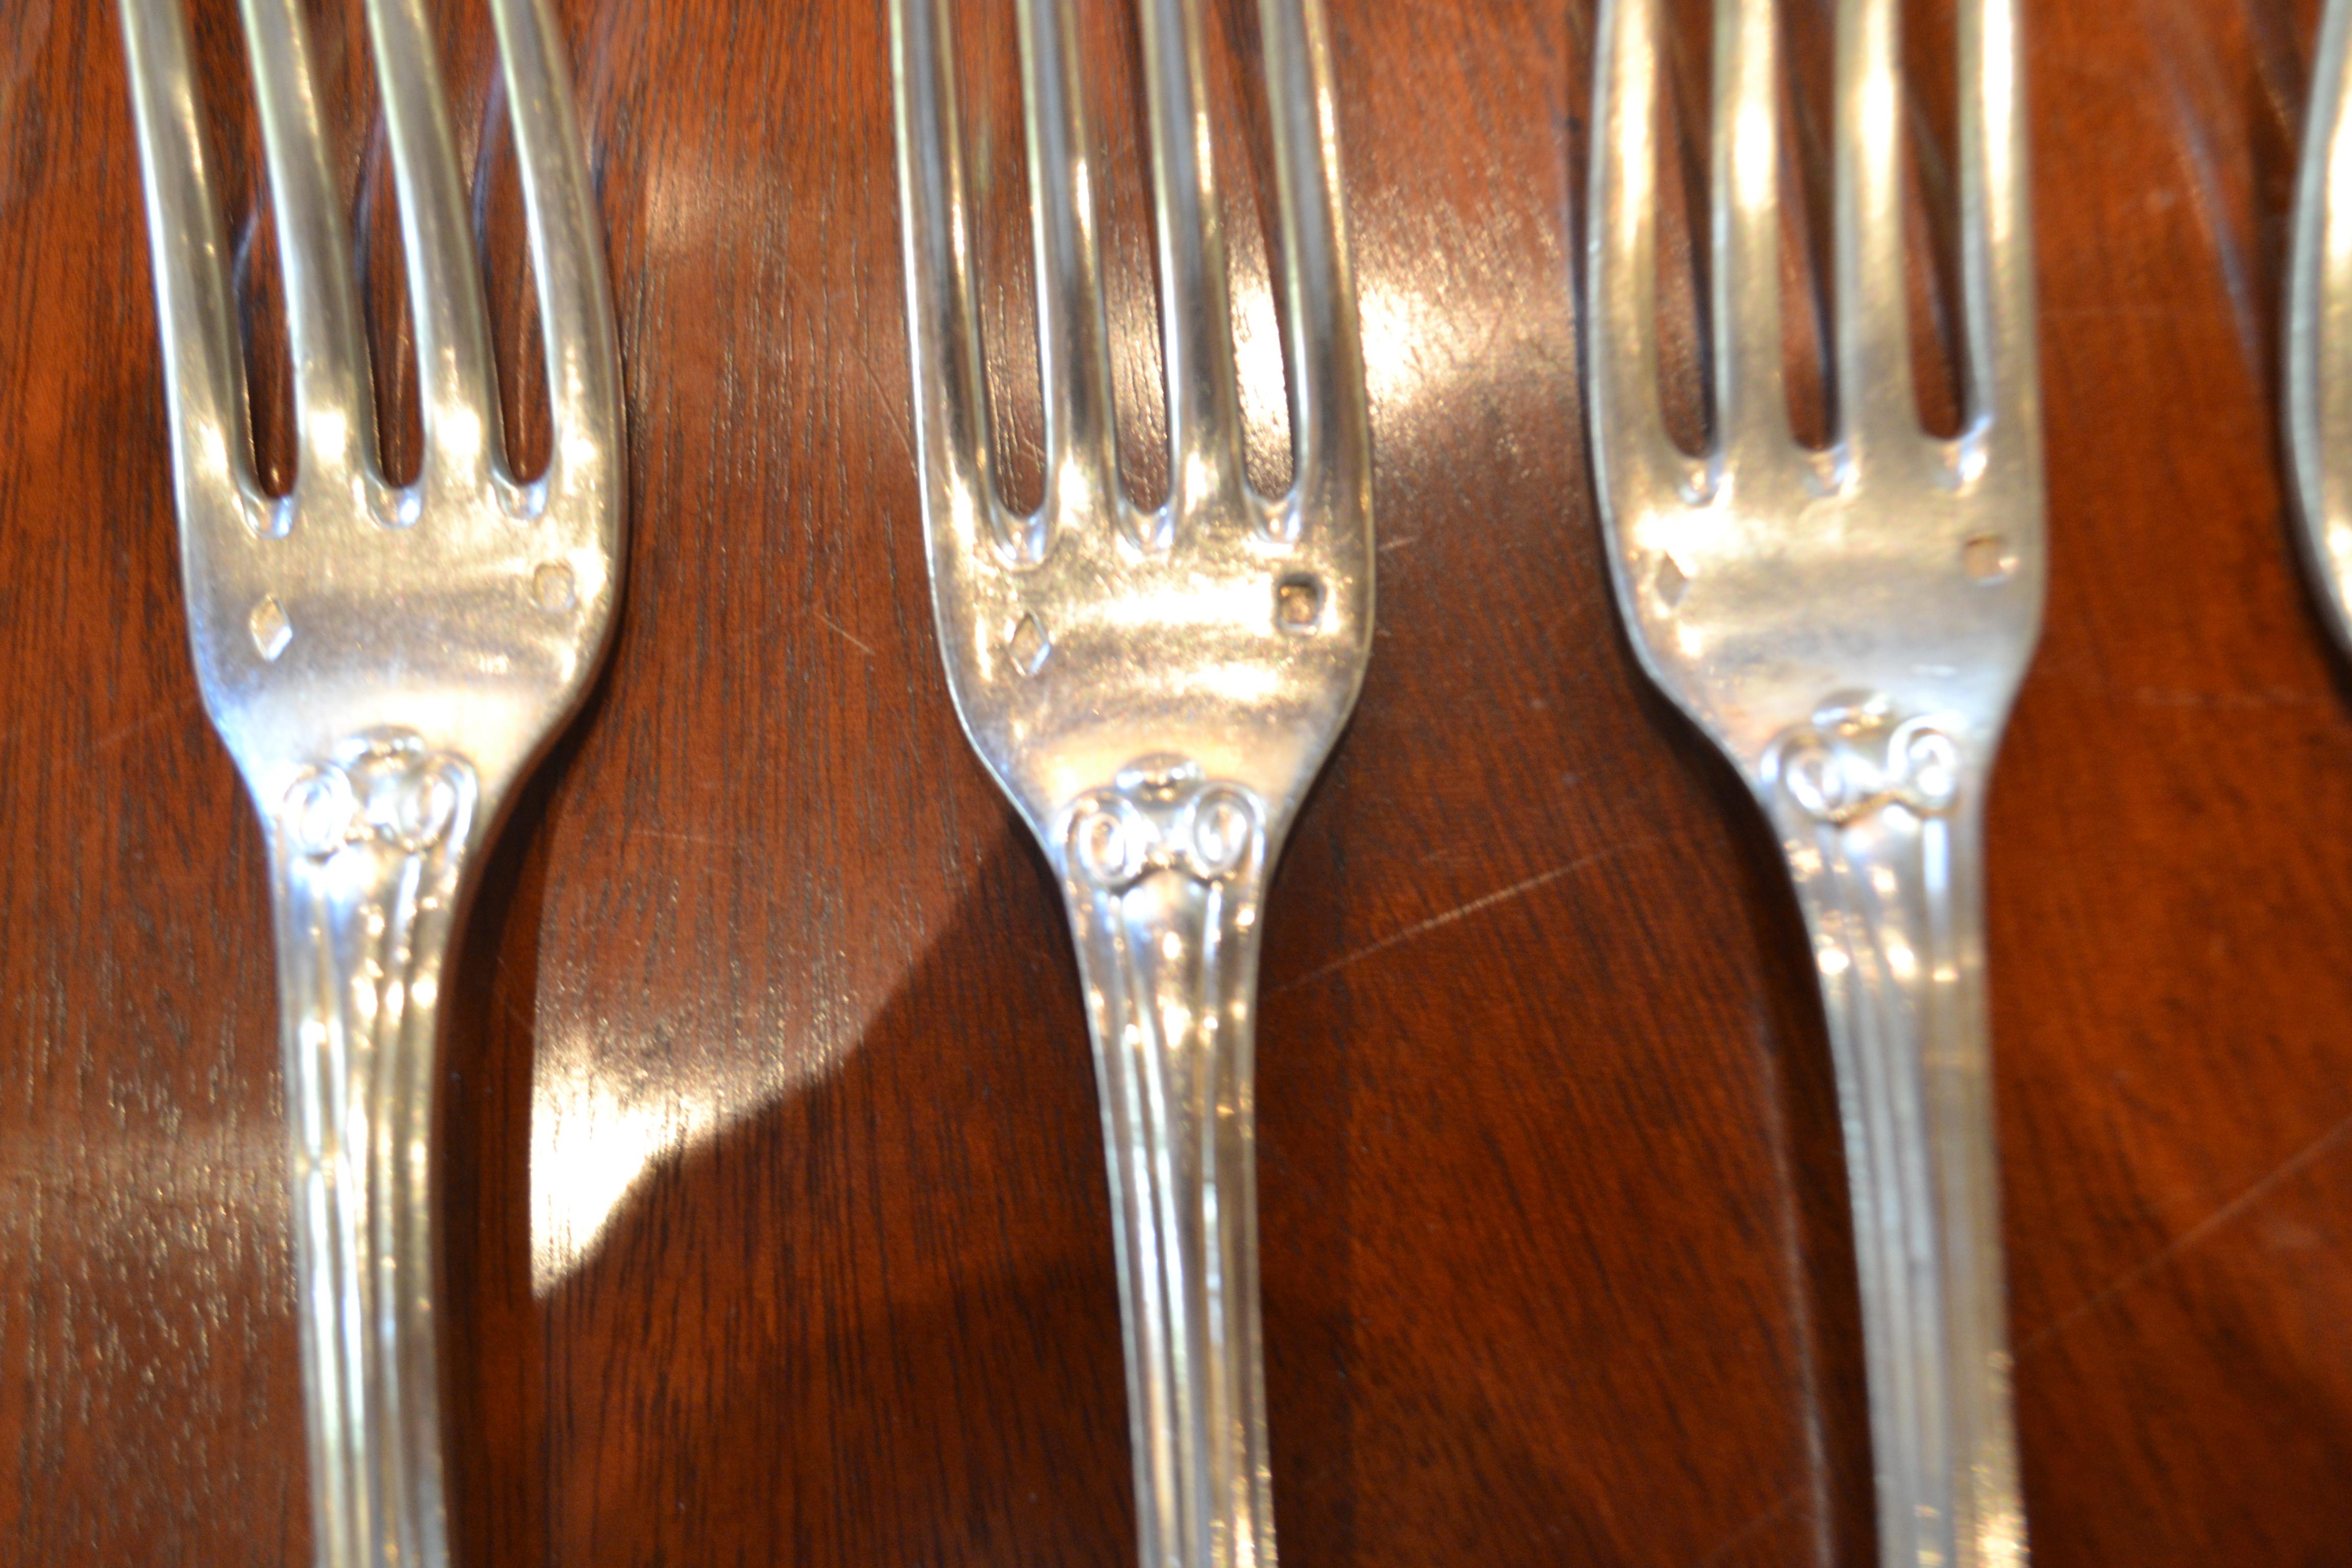 Odiot Paris Sterling Fontanelle Silverware In Good Condition For Sale In Vista, CA